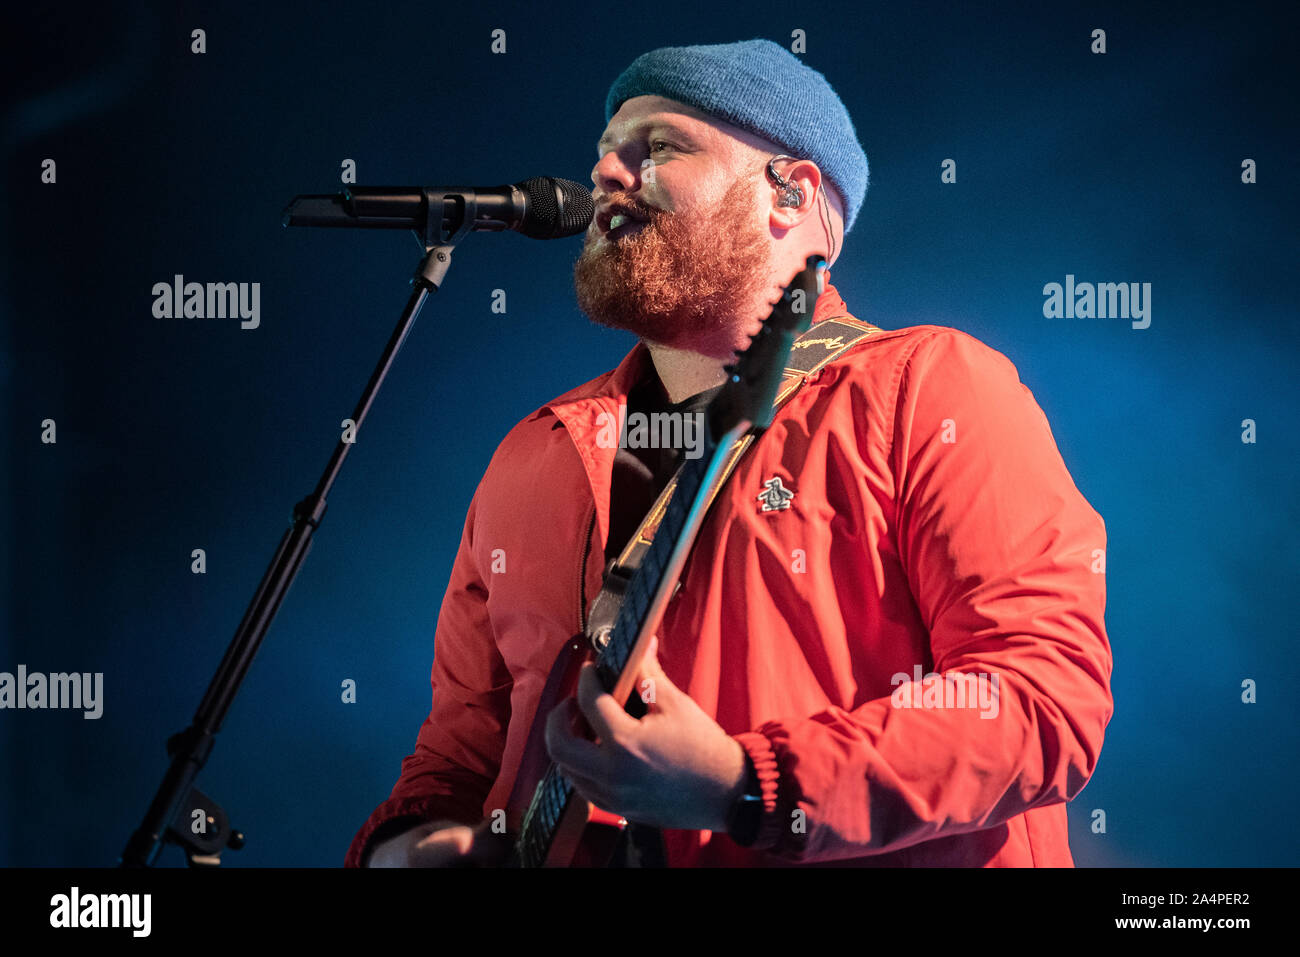 OFFICINE GRANDI RIPARAZIONI, TORINO, ITALY - 2019/10/15: The British singer and song writer Tom Walker performing live on stage at OGR in Torino for his 'What a time to be alive' tour single Italian concert Stock Photo